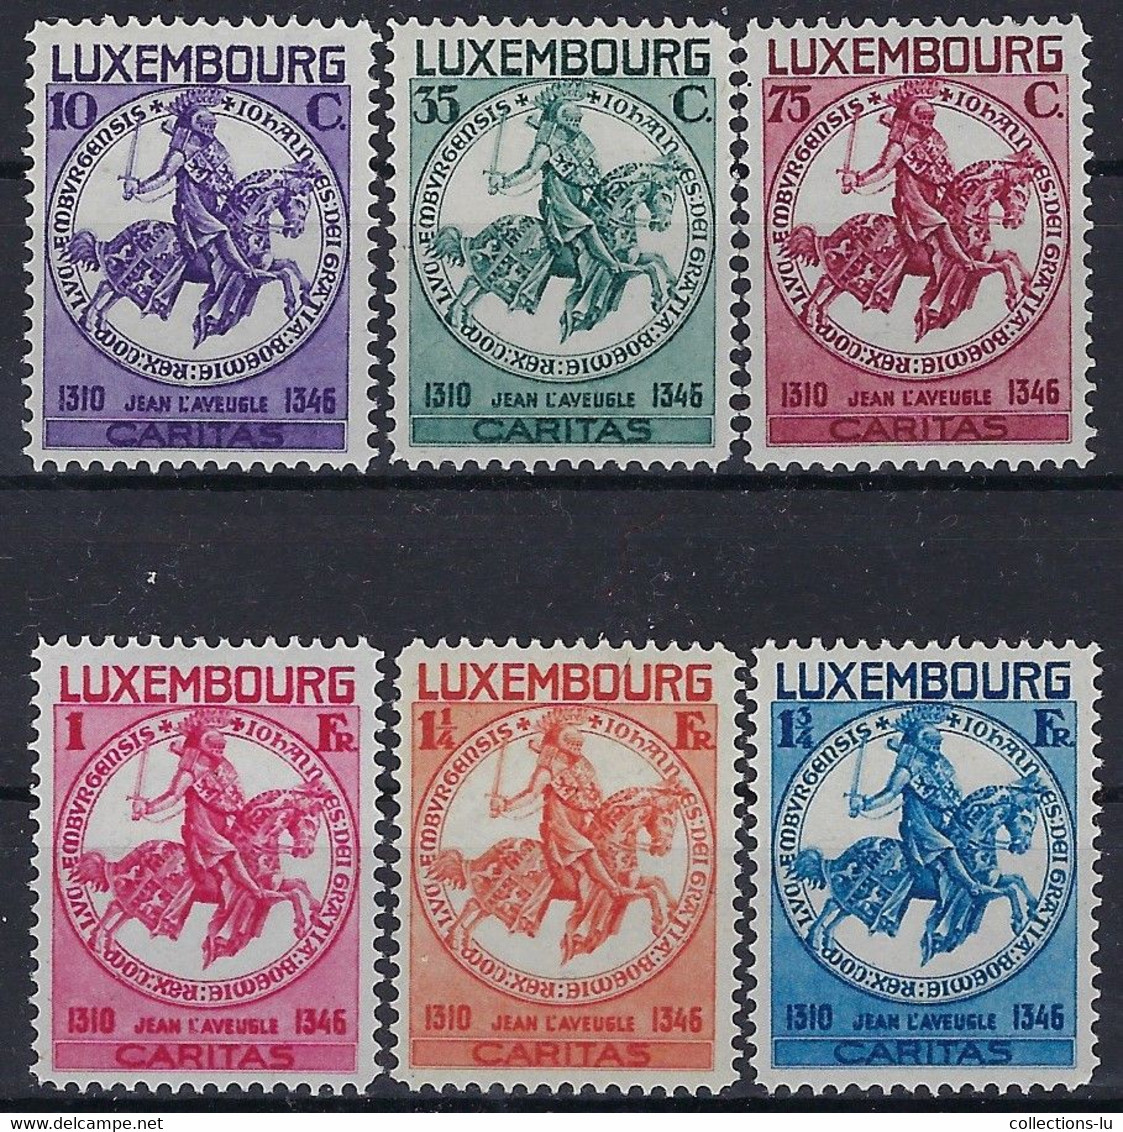 Luxembourg - Luxemburg - Timbres  1934  CARITAS   Jean L'Aveugle  Série MH*  VC.140,- - Gebraucht